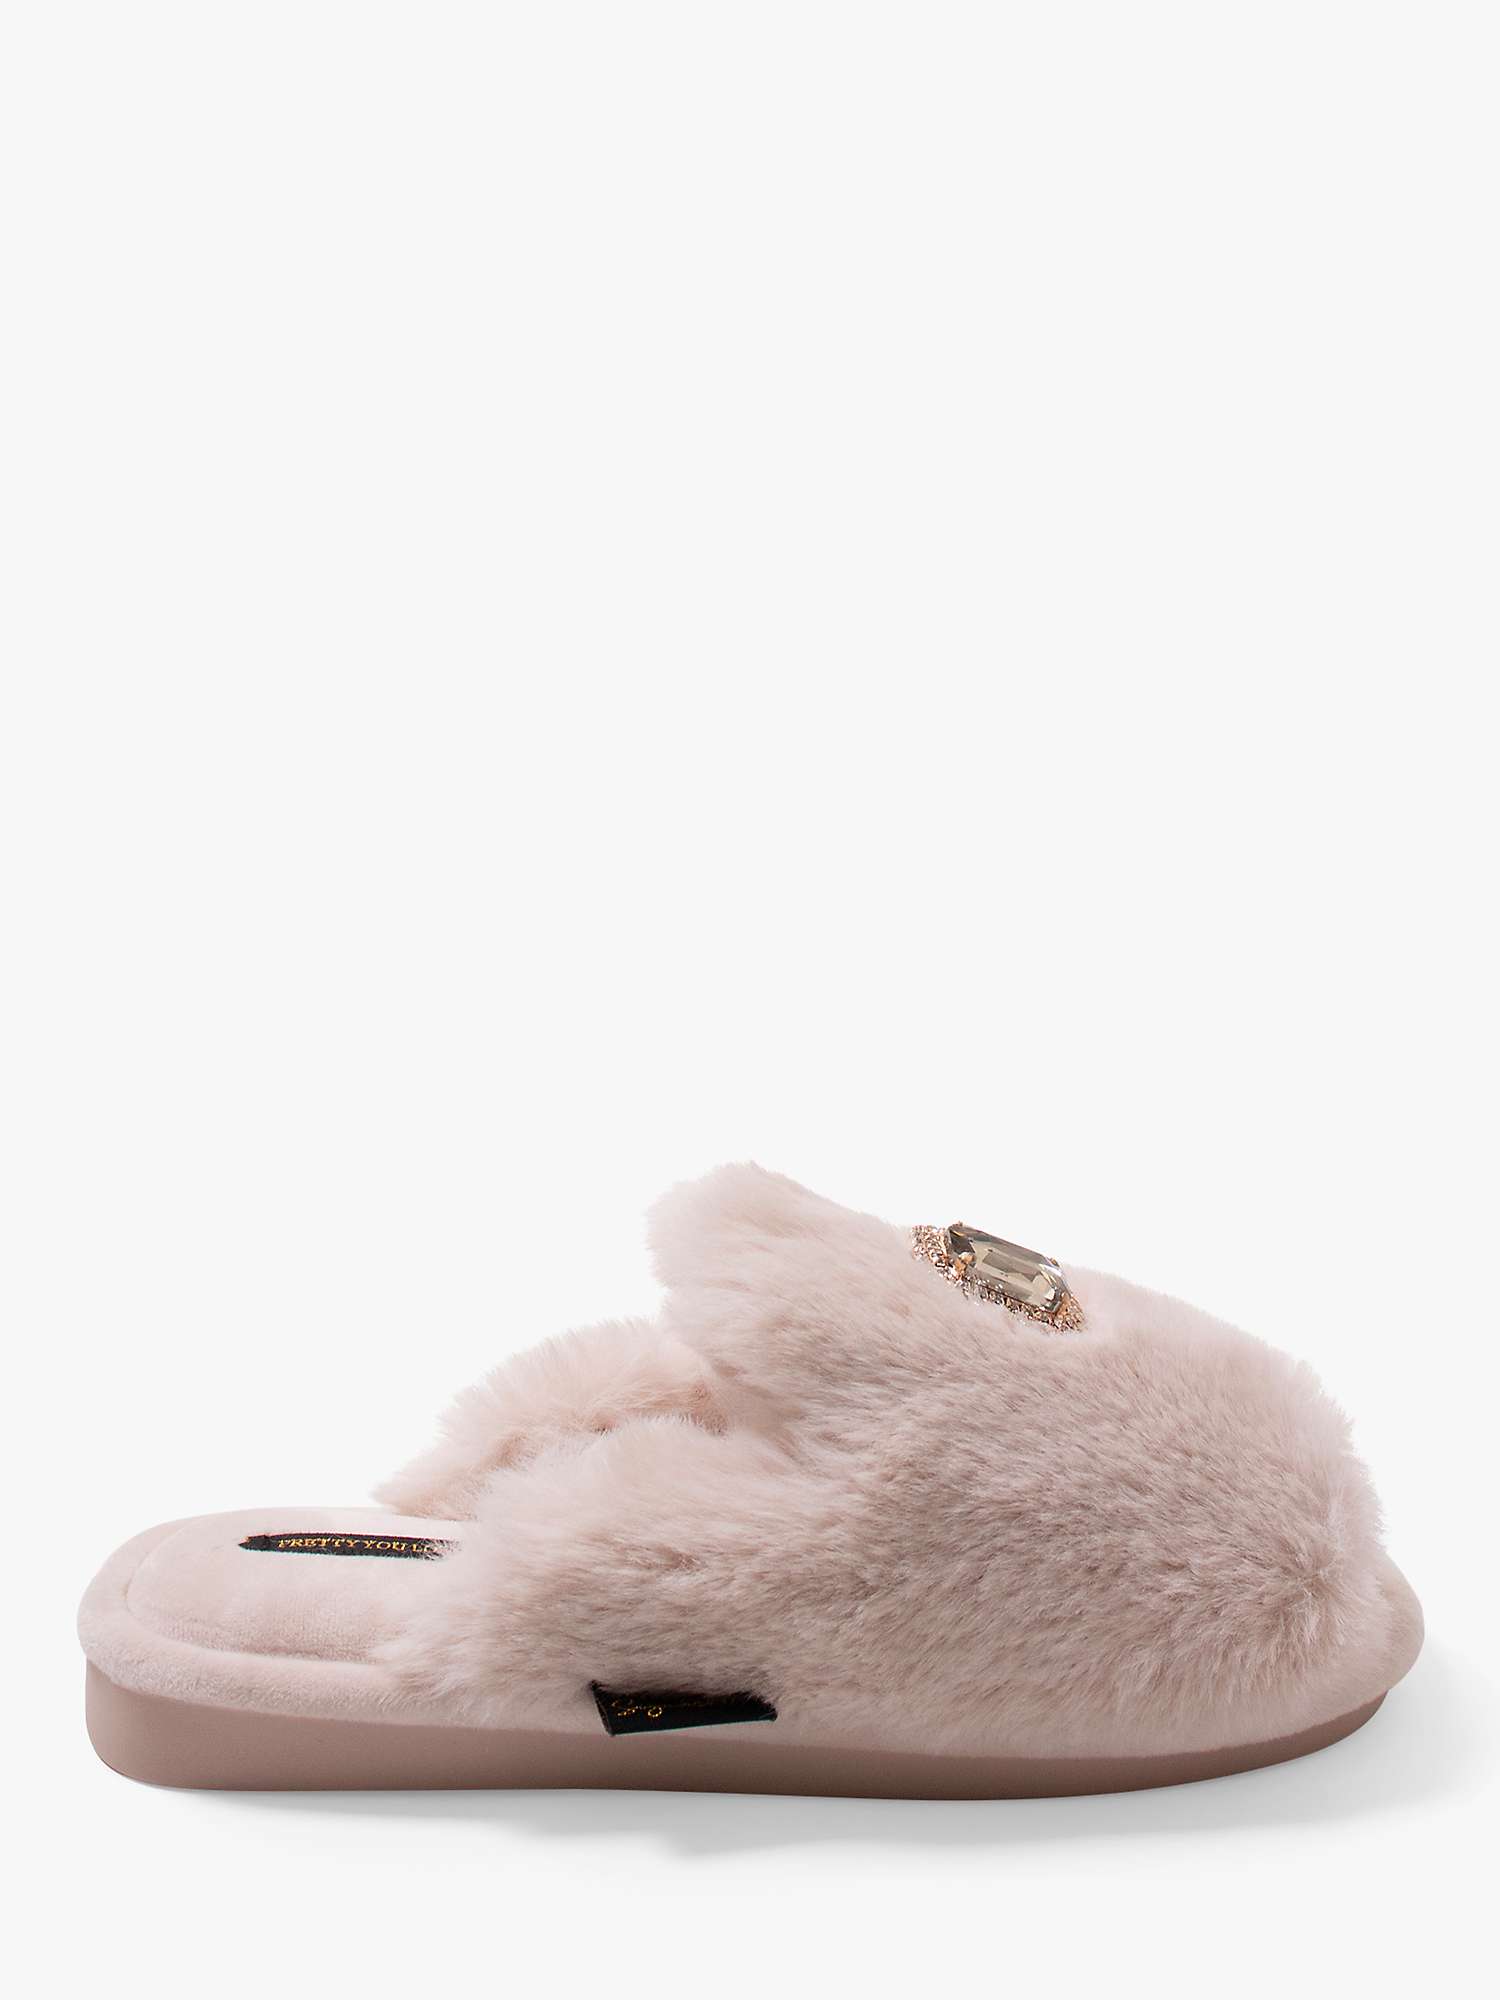 Buy Pretty You London Fifi Slippers Online at johnlewis.com